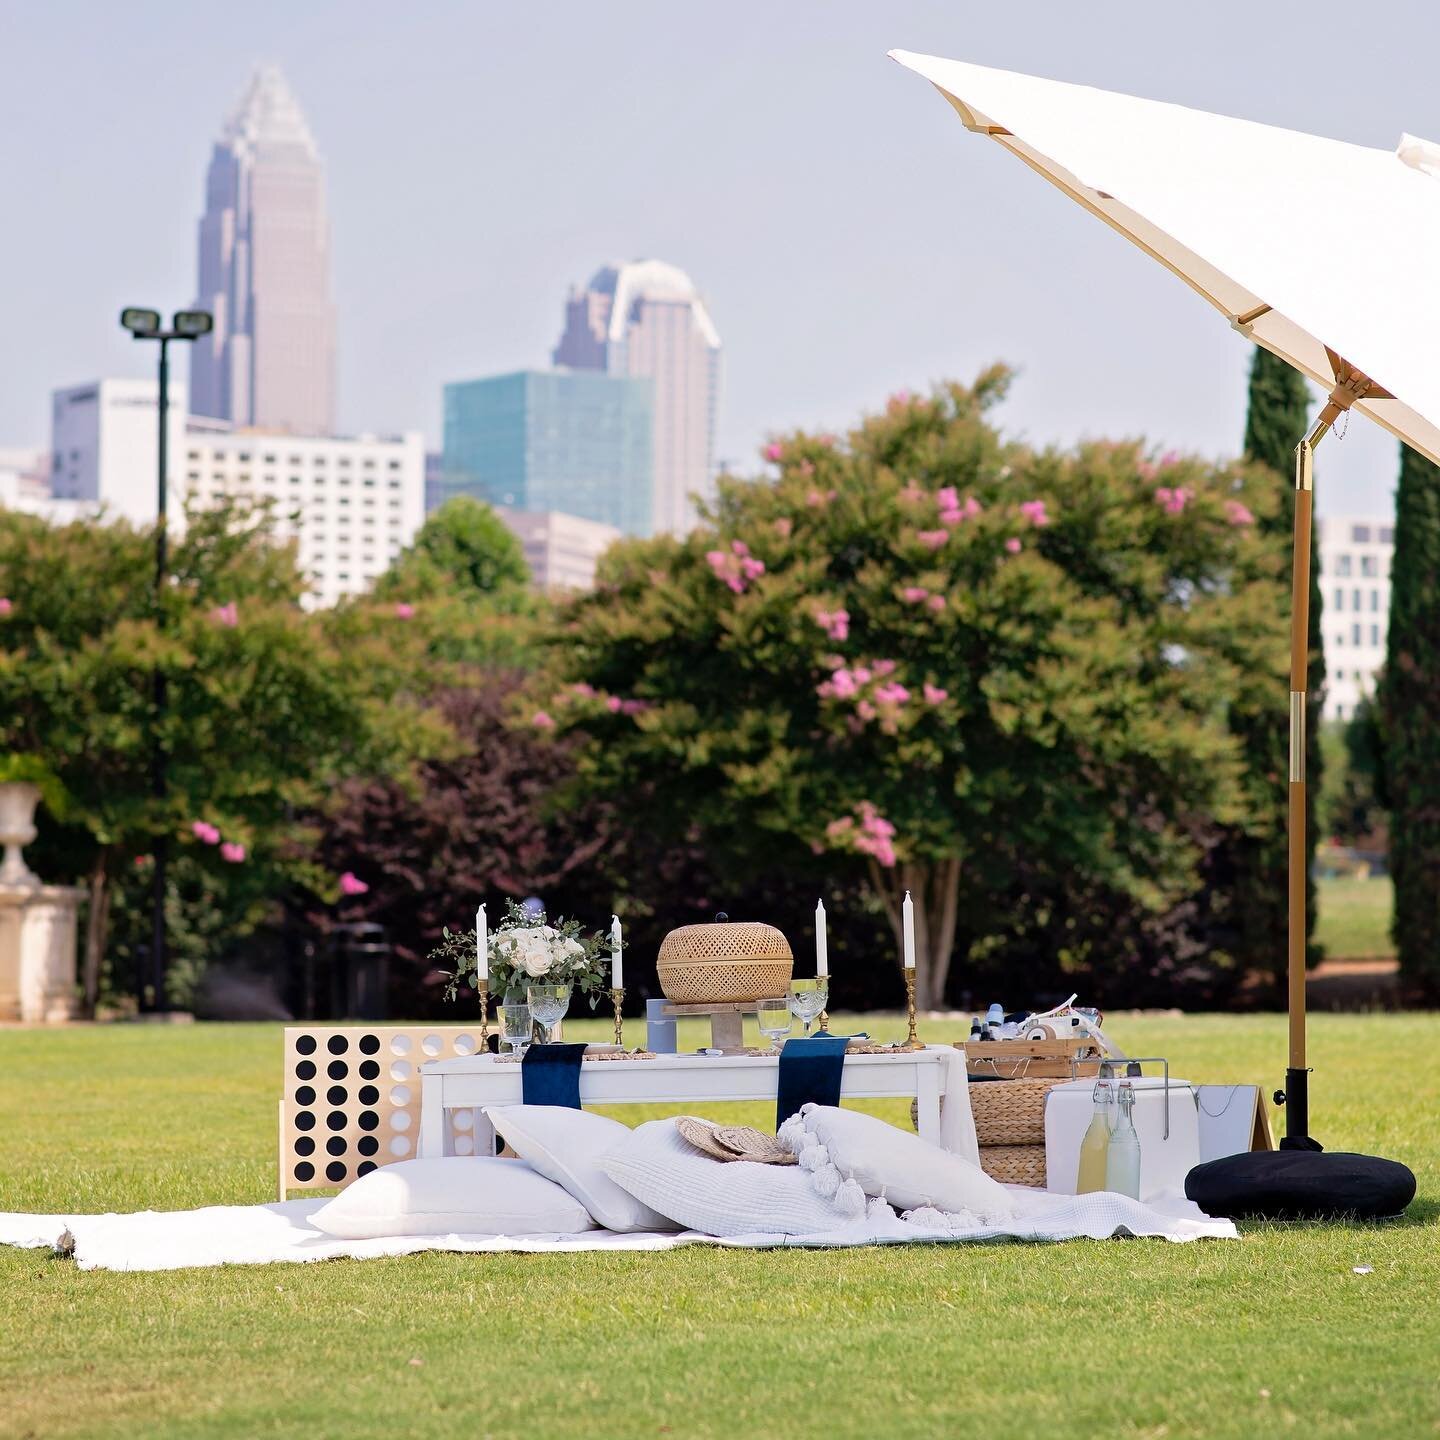 How perfect is this view?!💕💕
.
.
.
.
.

#thegatheringpicnicco&nbsp;#clt&nbsp;#cltpicnic&nbsp;#cltpicnics&nbsp;#charlottedate&nbsp;#charlottedatenight&nbsp;#charlottepicnic&nbsp;#charlottepicnics&nbsp;#charlotteluxurypicnic&nbsp;&nbsp;#charlotteluxu